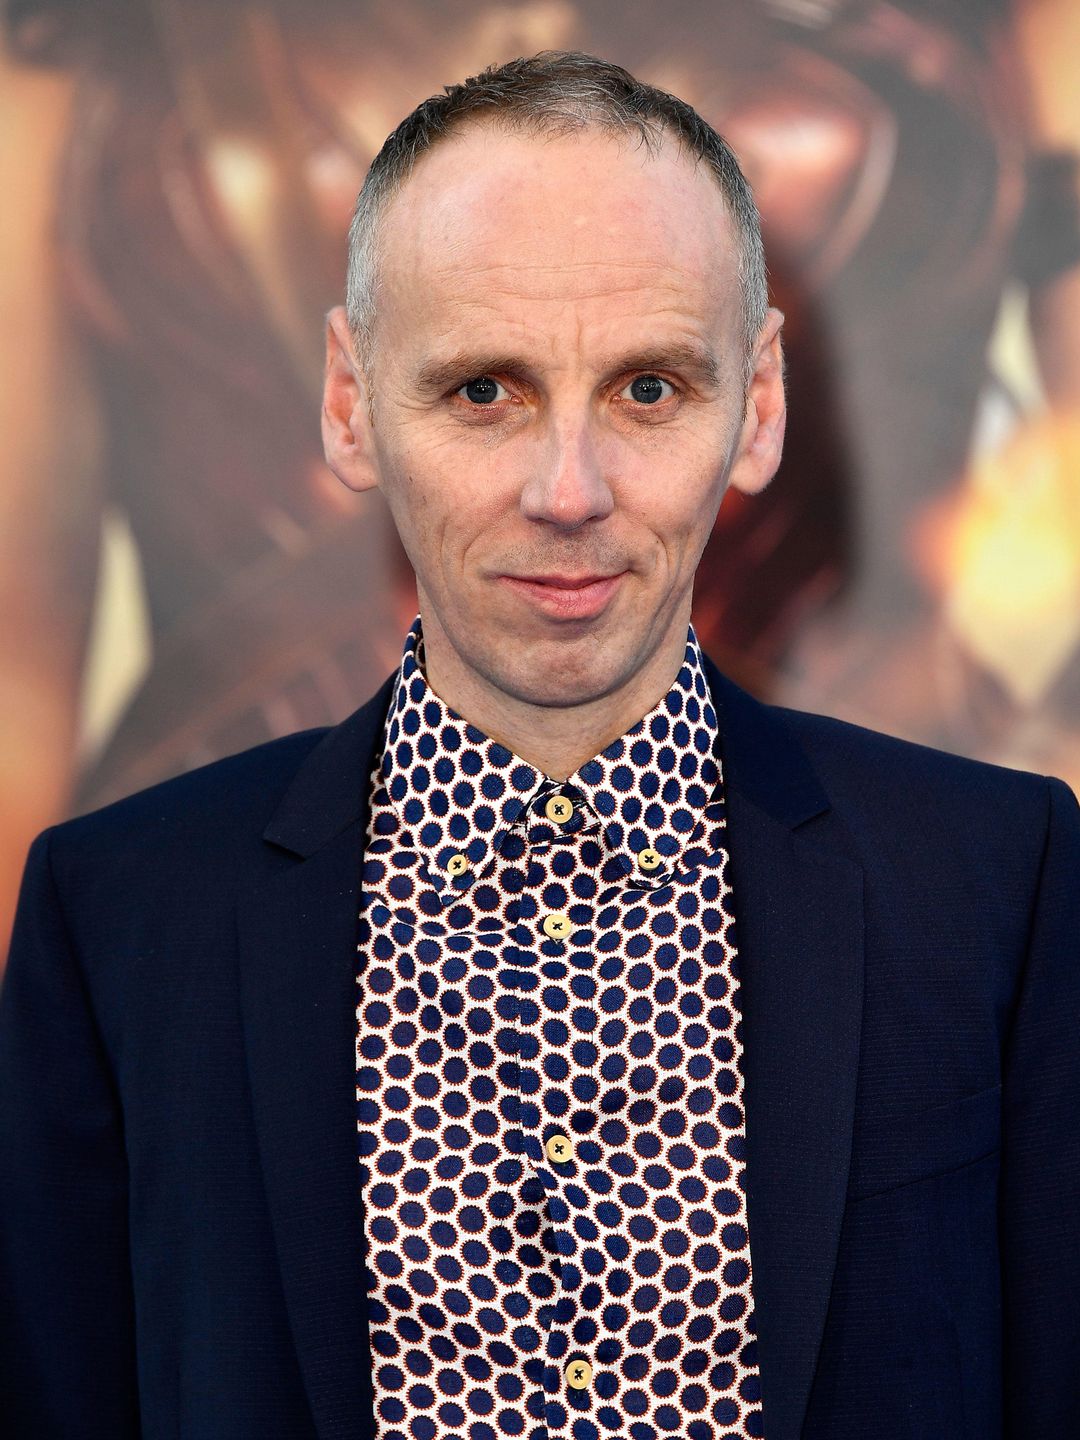 Ewen Bremner how did he became famous